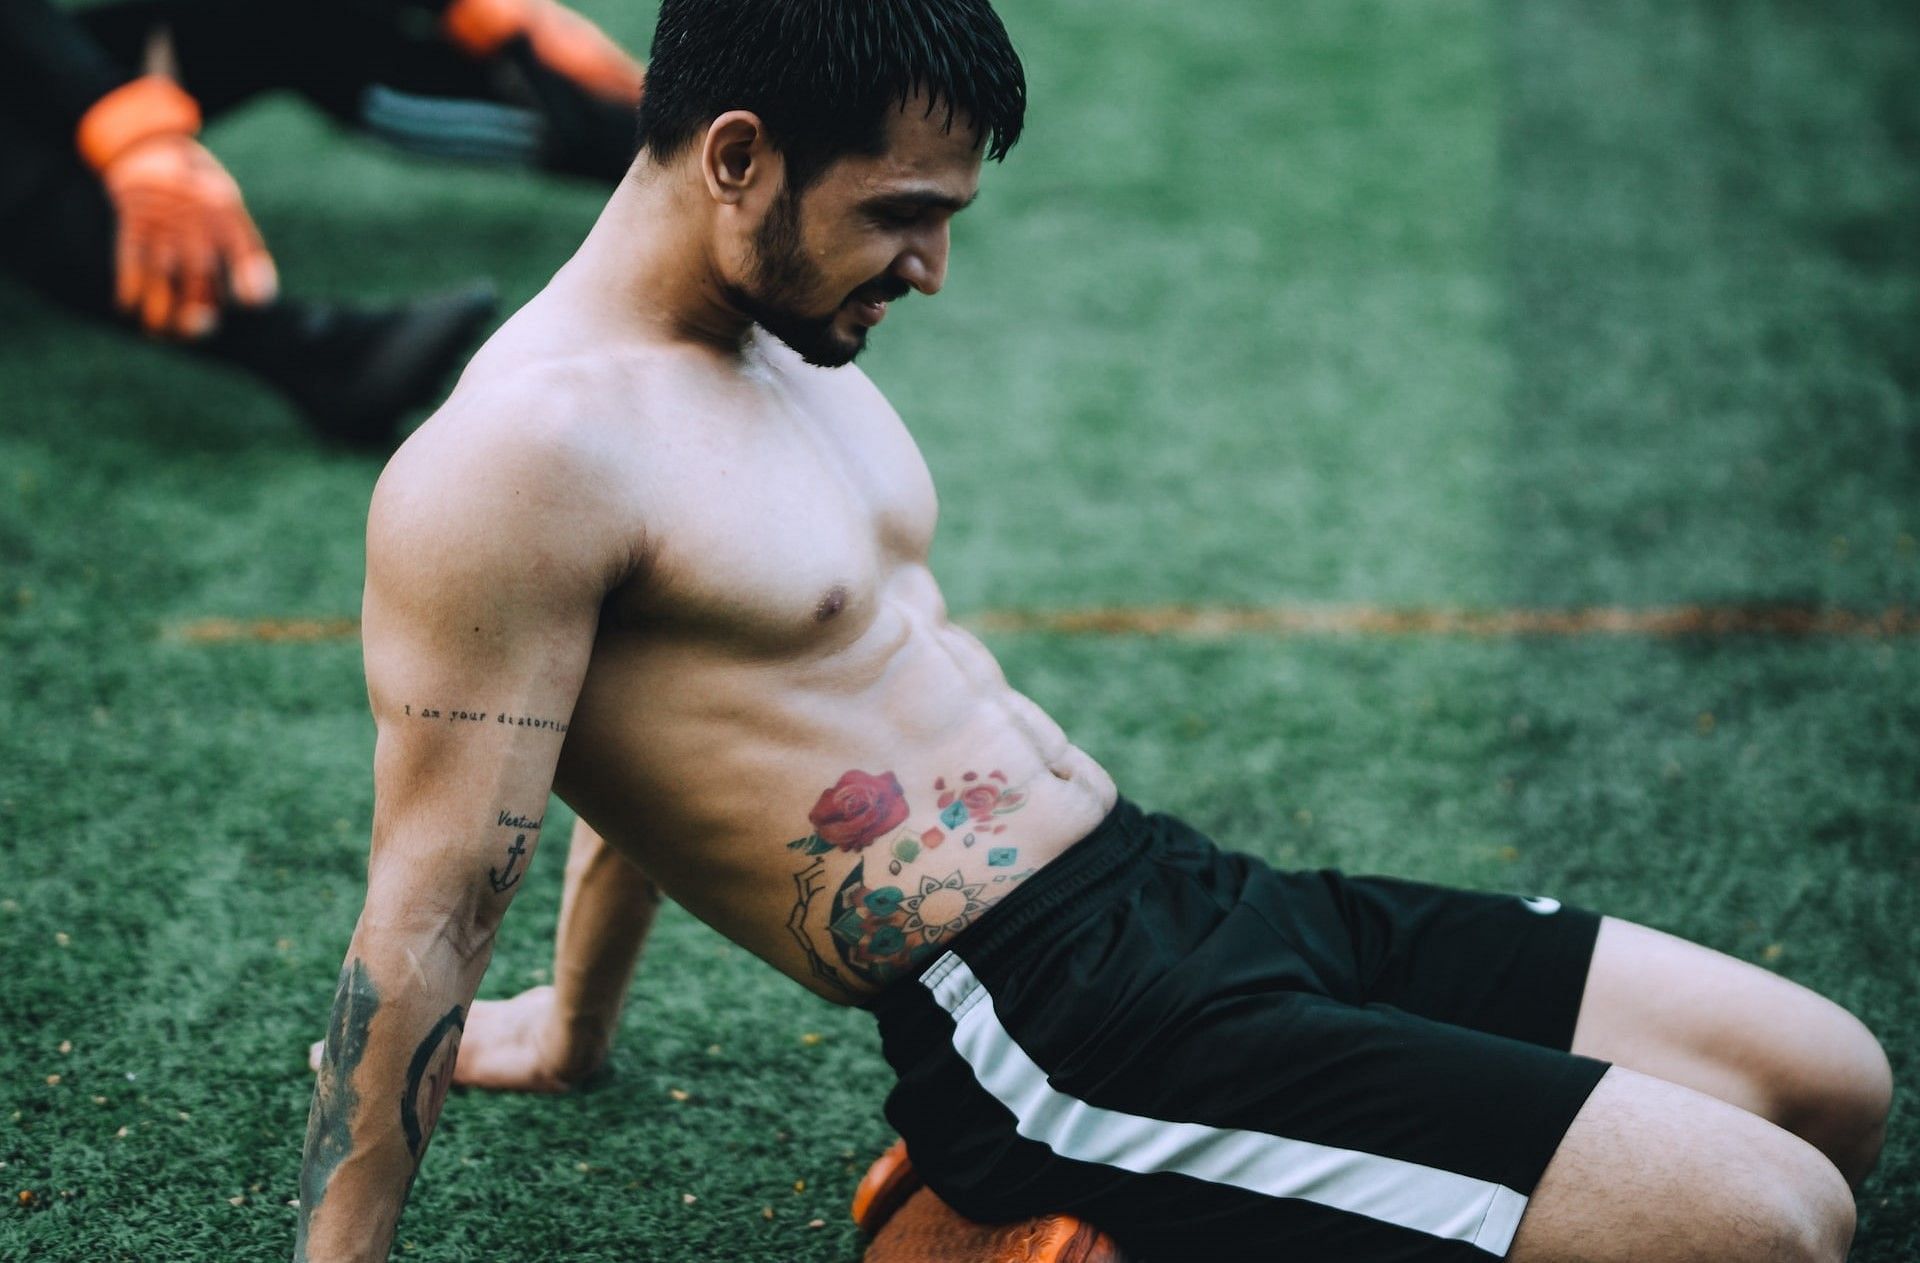 Build upper abs with easy exercises for men. (Photo via Arun Sharma/Unsplash)